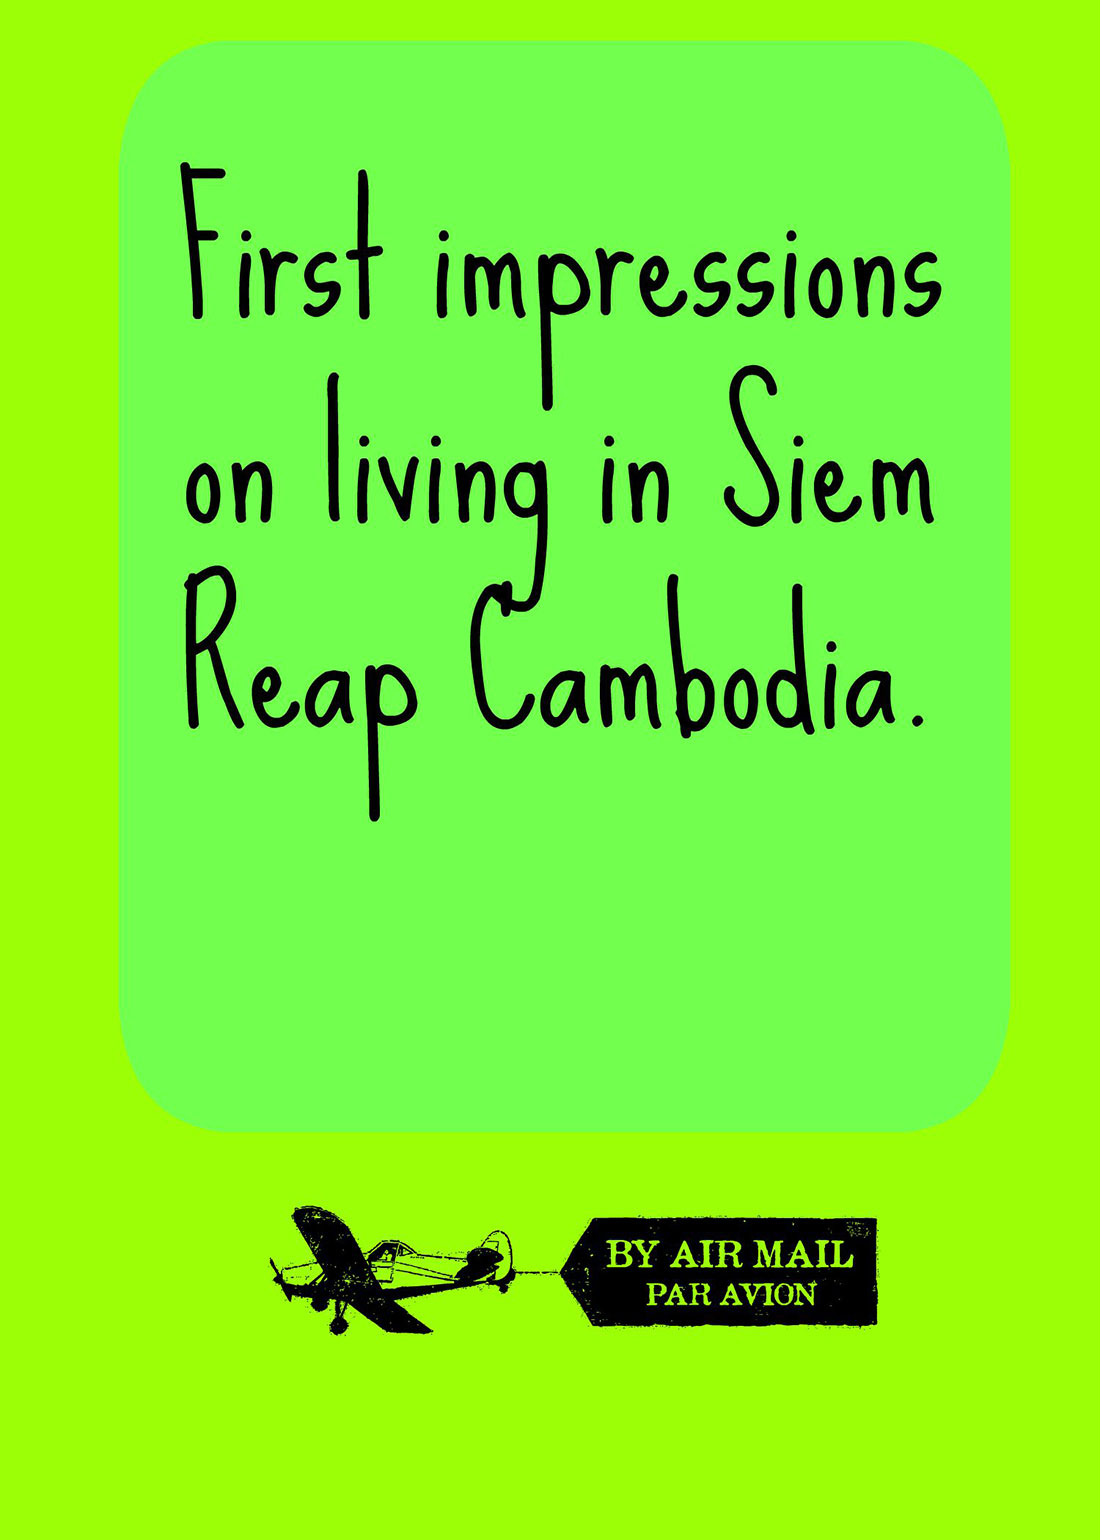 First impressions of living in Siem Reap